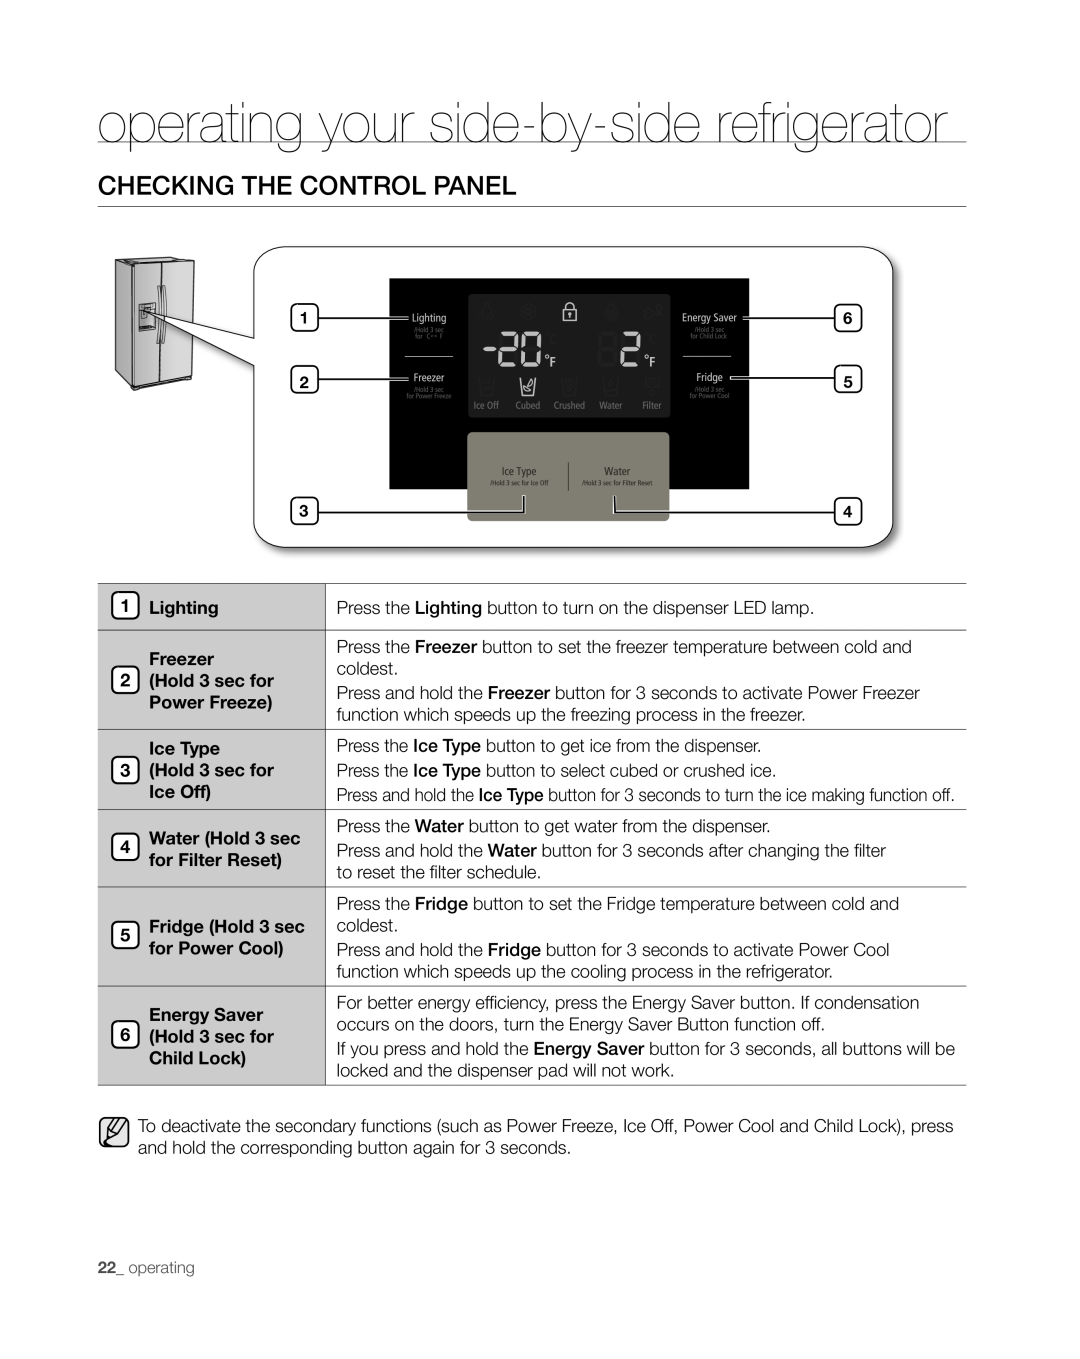 Samsung RS265TDWP, RS267TDWP user manual operating your side-by-side refrigerator, Checking The Control Panel 